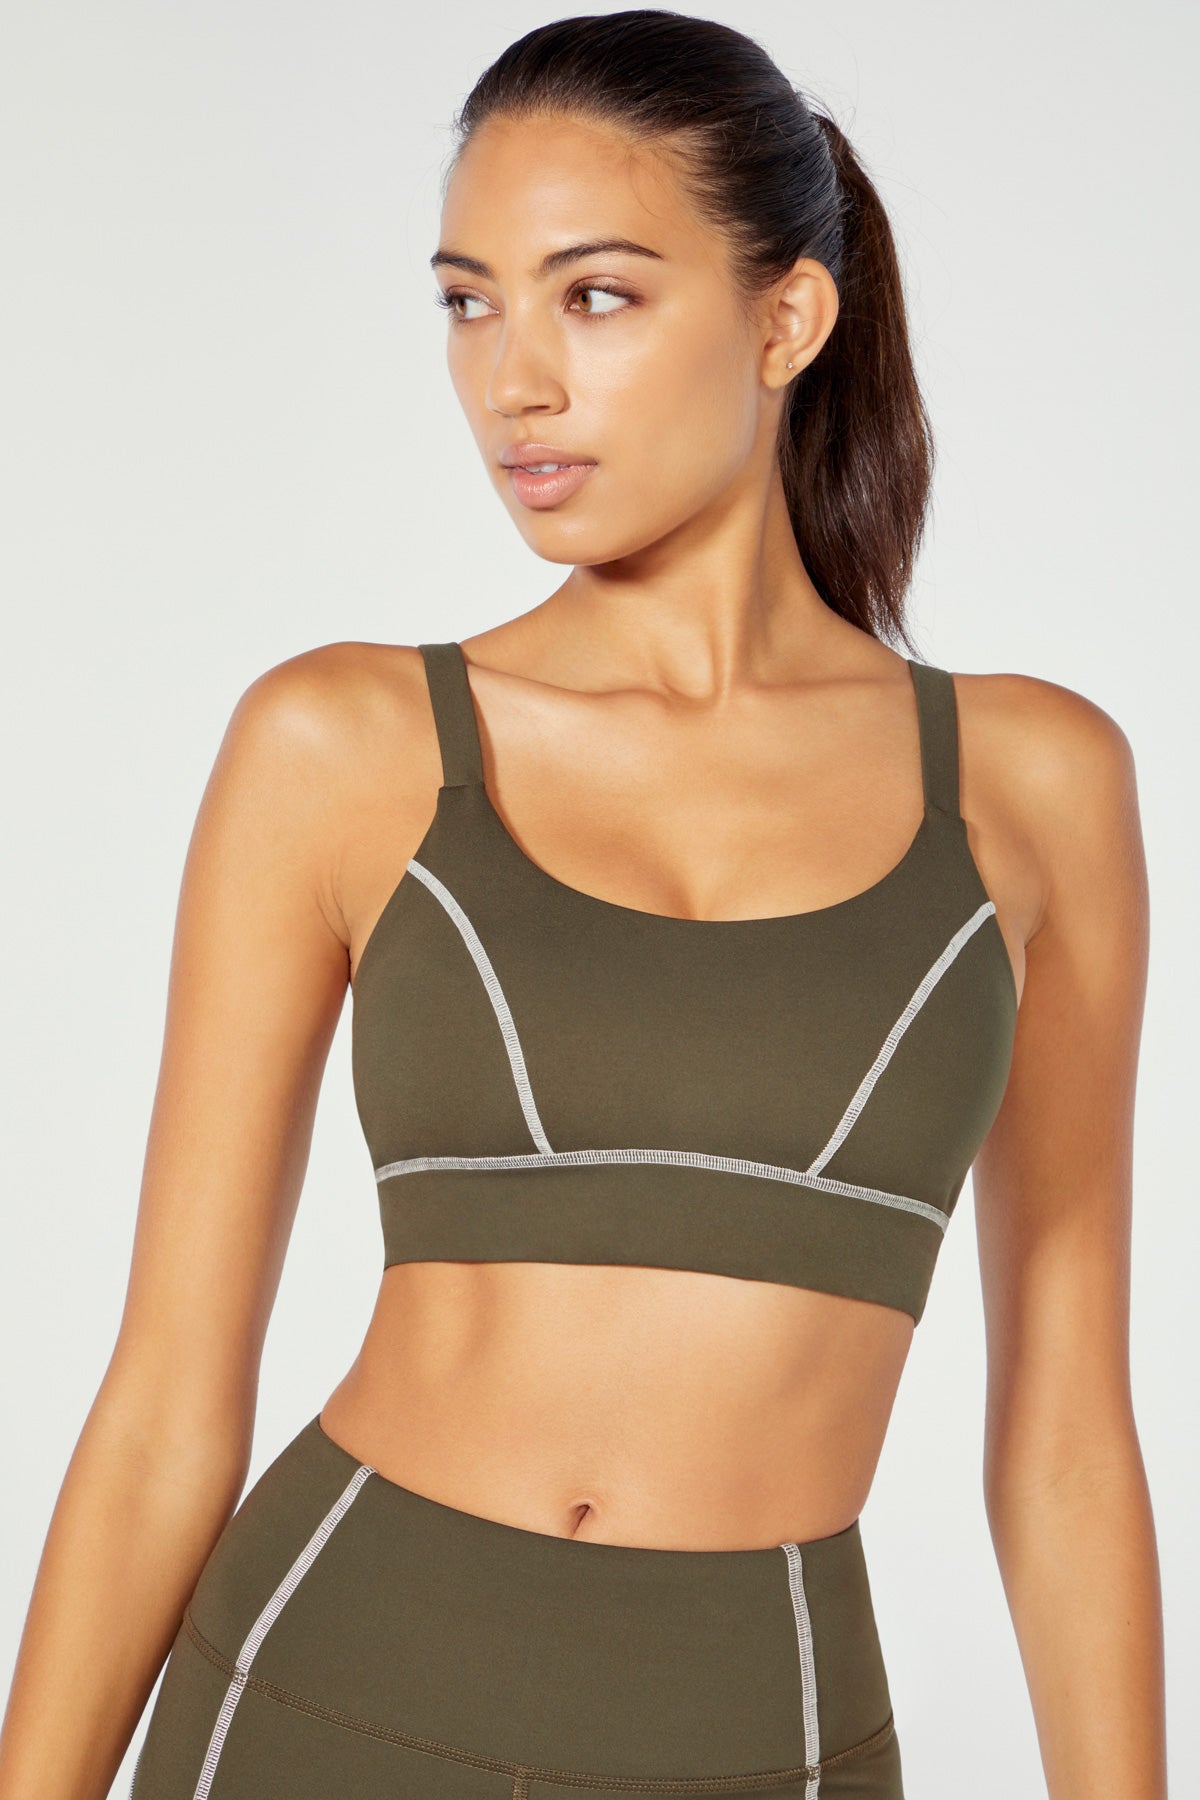 Go Thyme - An October 2021 Ellie Activewear Box Outfit